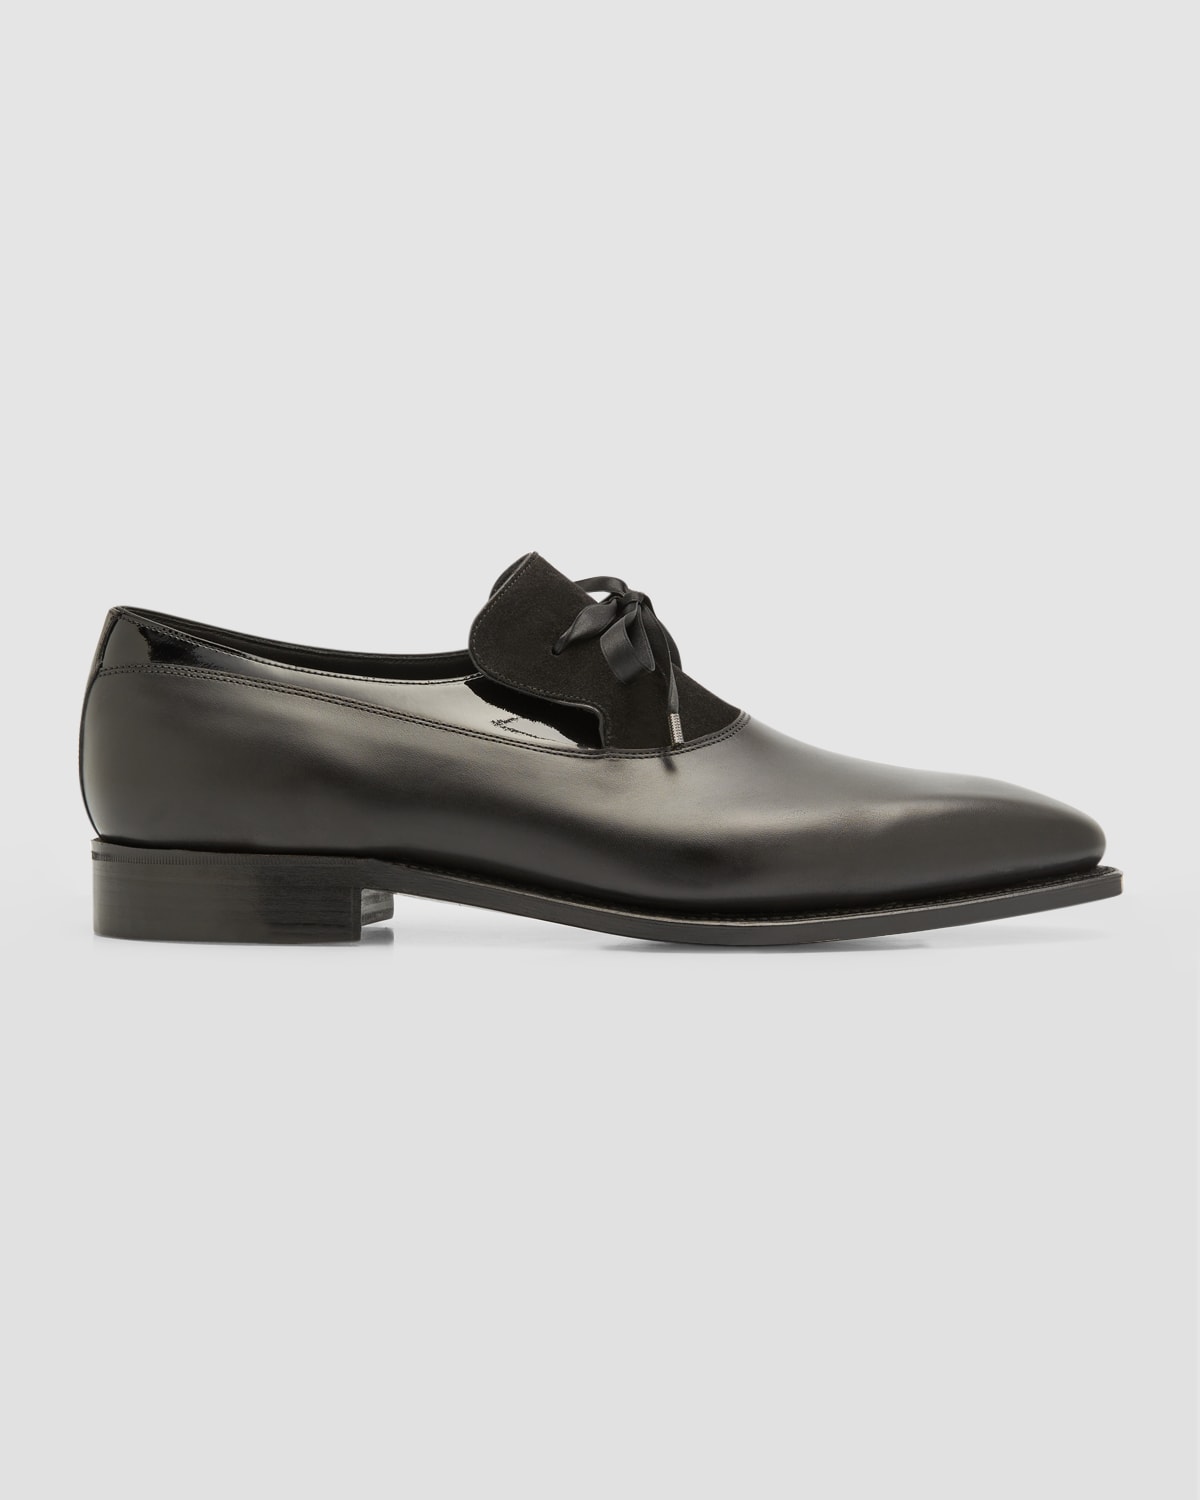 Moschino Men's Leather Penny Loafers with Logo Trim | Neiman Marcus